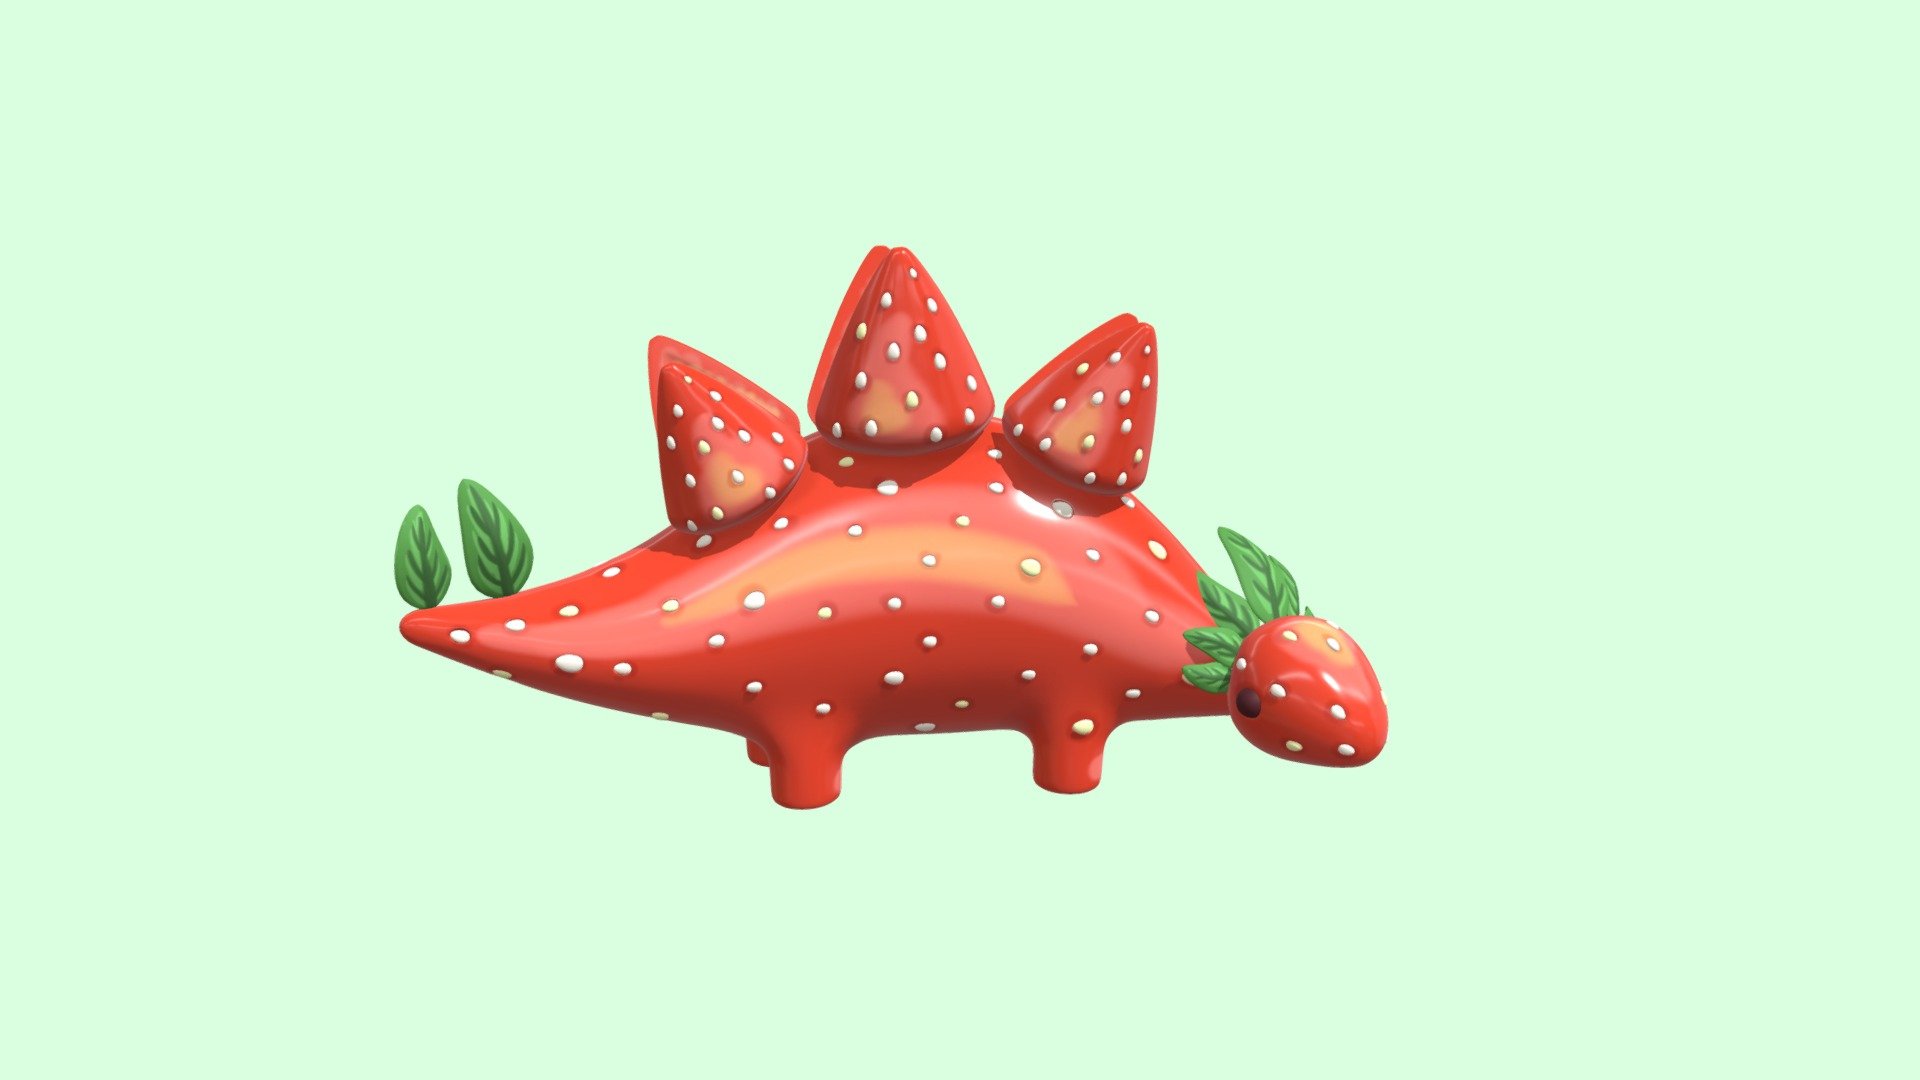 Original concept by the talented trisarahtops-sketches on tumblr. Super cute art all around, but I fell in love with the fruit dinosaurs.

Please check out the original artwork on her blog!

Bananasaur was simple shapes, with at least an attempt at keeping it low poly. In the end though, this is fun for me, and I'm not putting restrictions on the poly count for myself anymore. This guy is adorable and should be no matter how many times he is subdivided 3d model